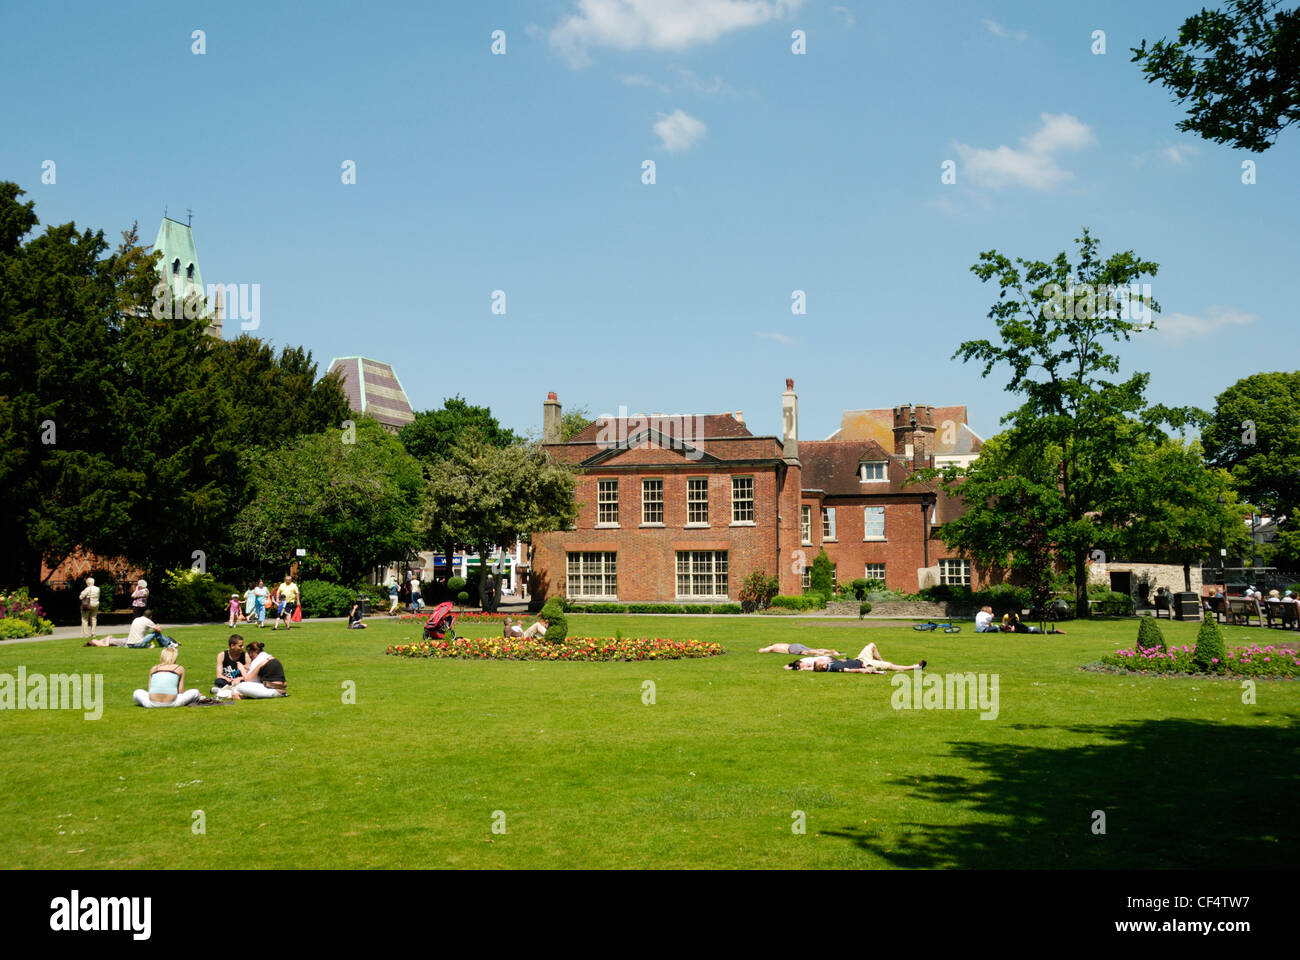 People relaxing in Abbey Gardens with Abbey House in the distance. Stock Photo